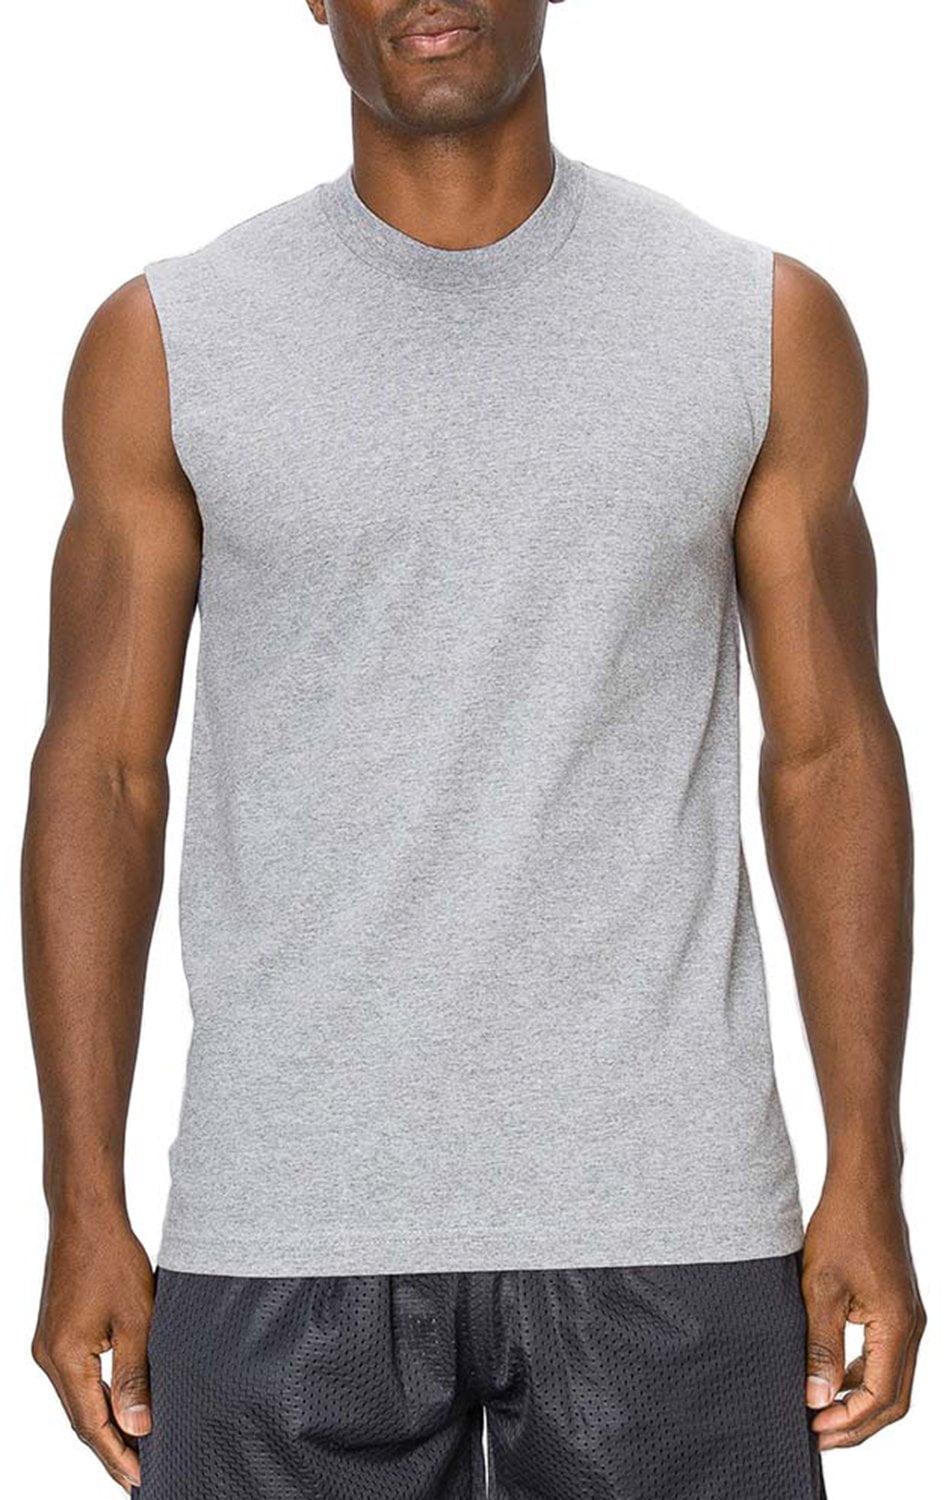 Men's Tank Top Vest Top Undershirt Sleeveless Shirt Plain Henley Outdoor  Going out Sleeveless Clothing Apparel Fashion Muscle 2023 - US $14.49 in  2023